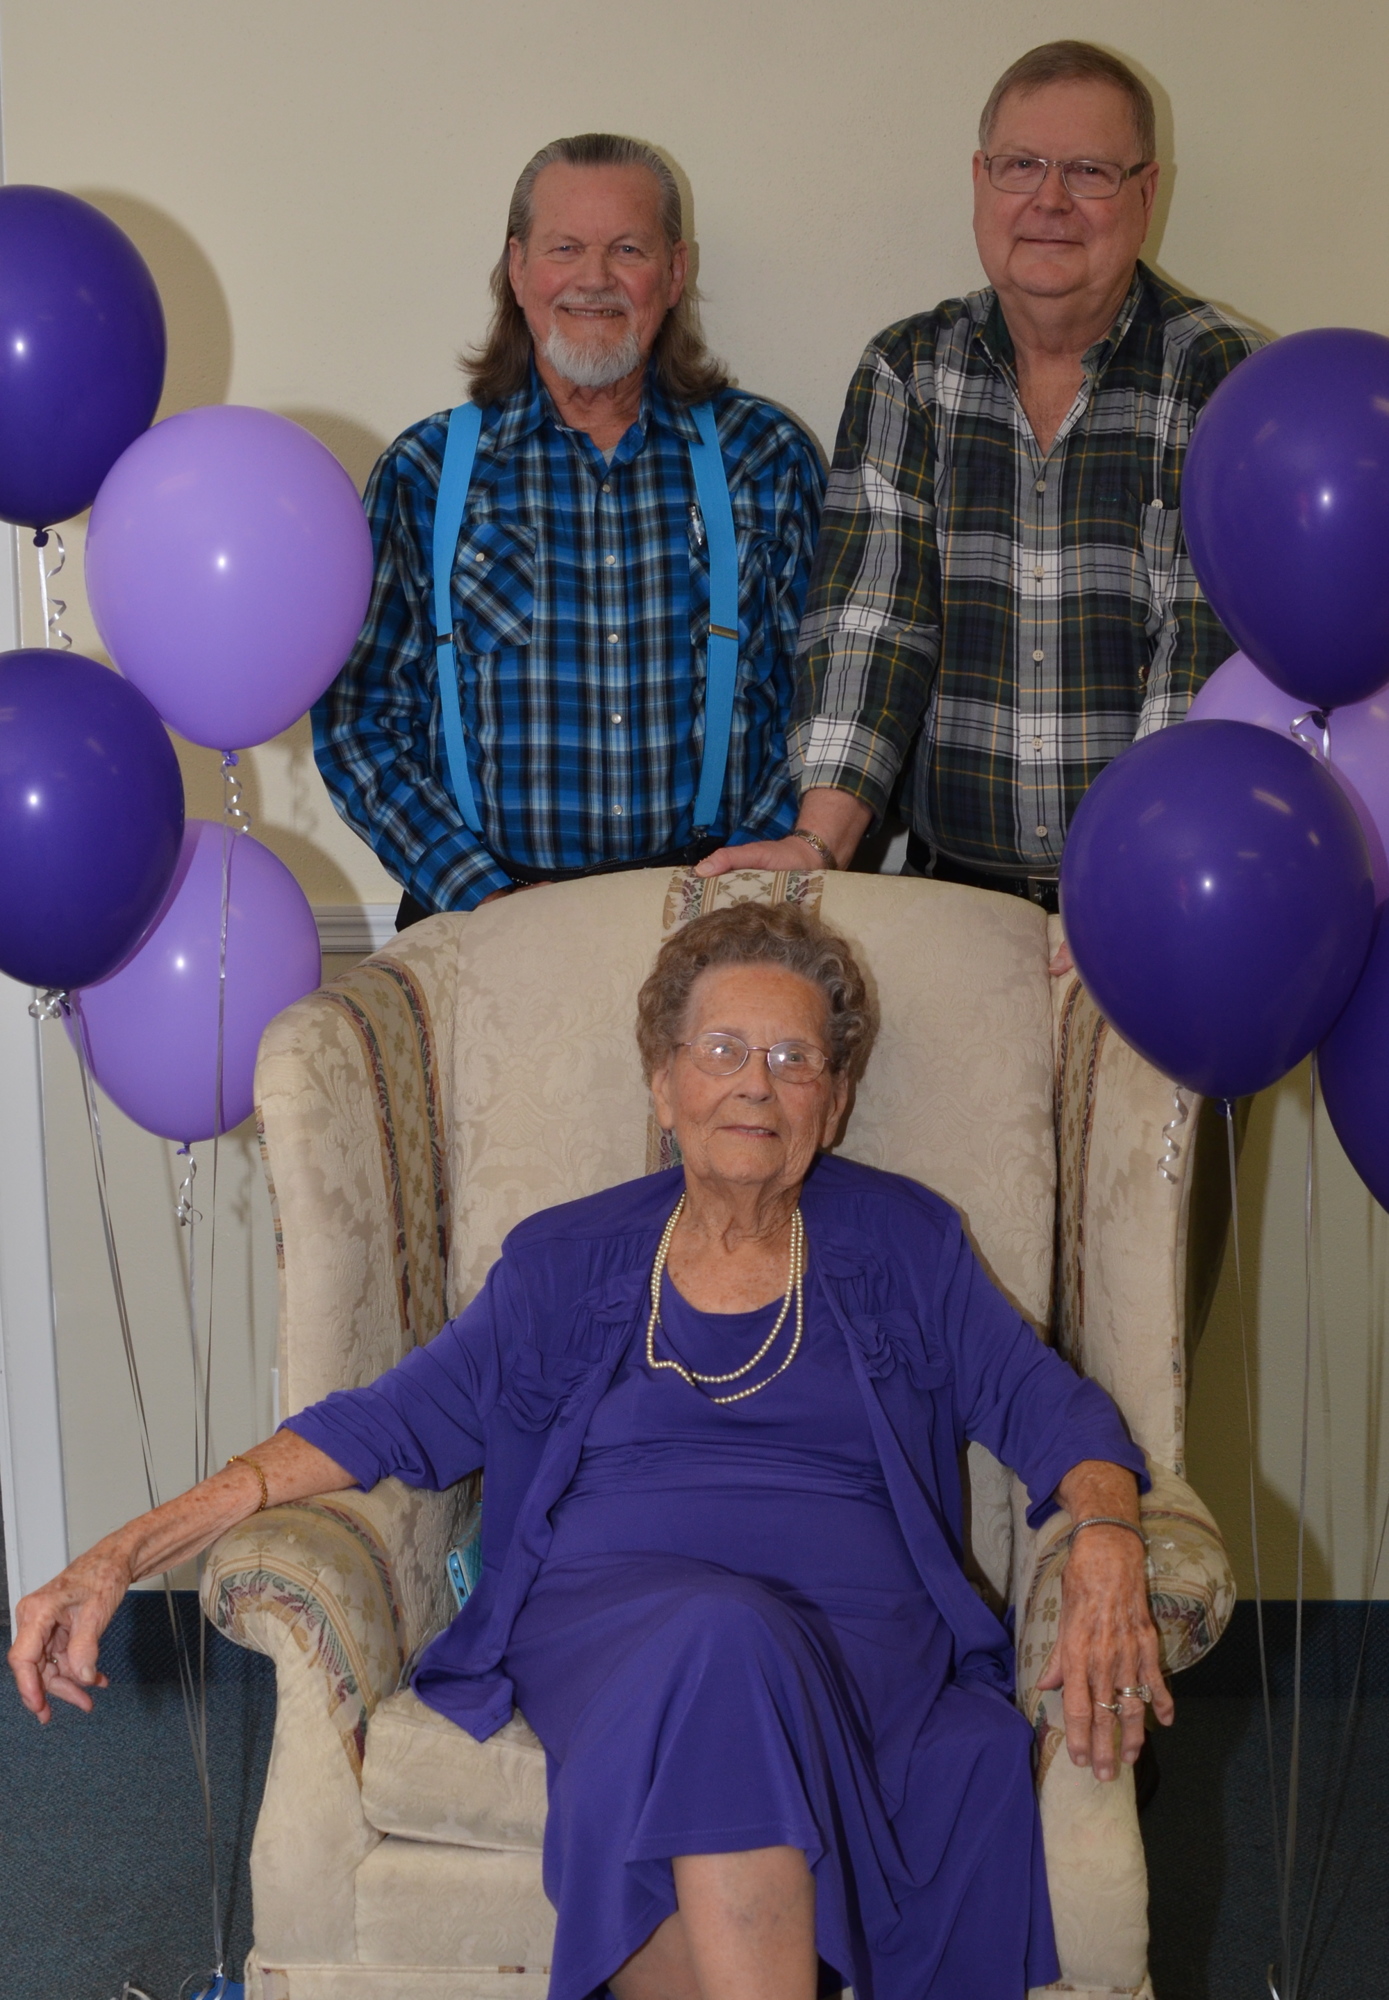 Kathleen Bean celebrated her 95th birthday with many friends and family, including her two sons, Jimmy, left, and Bill Bean.